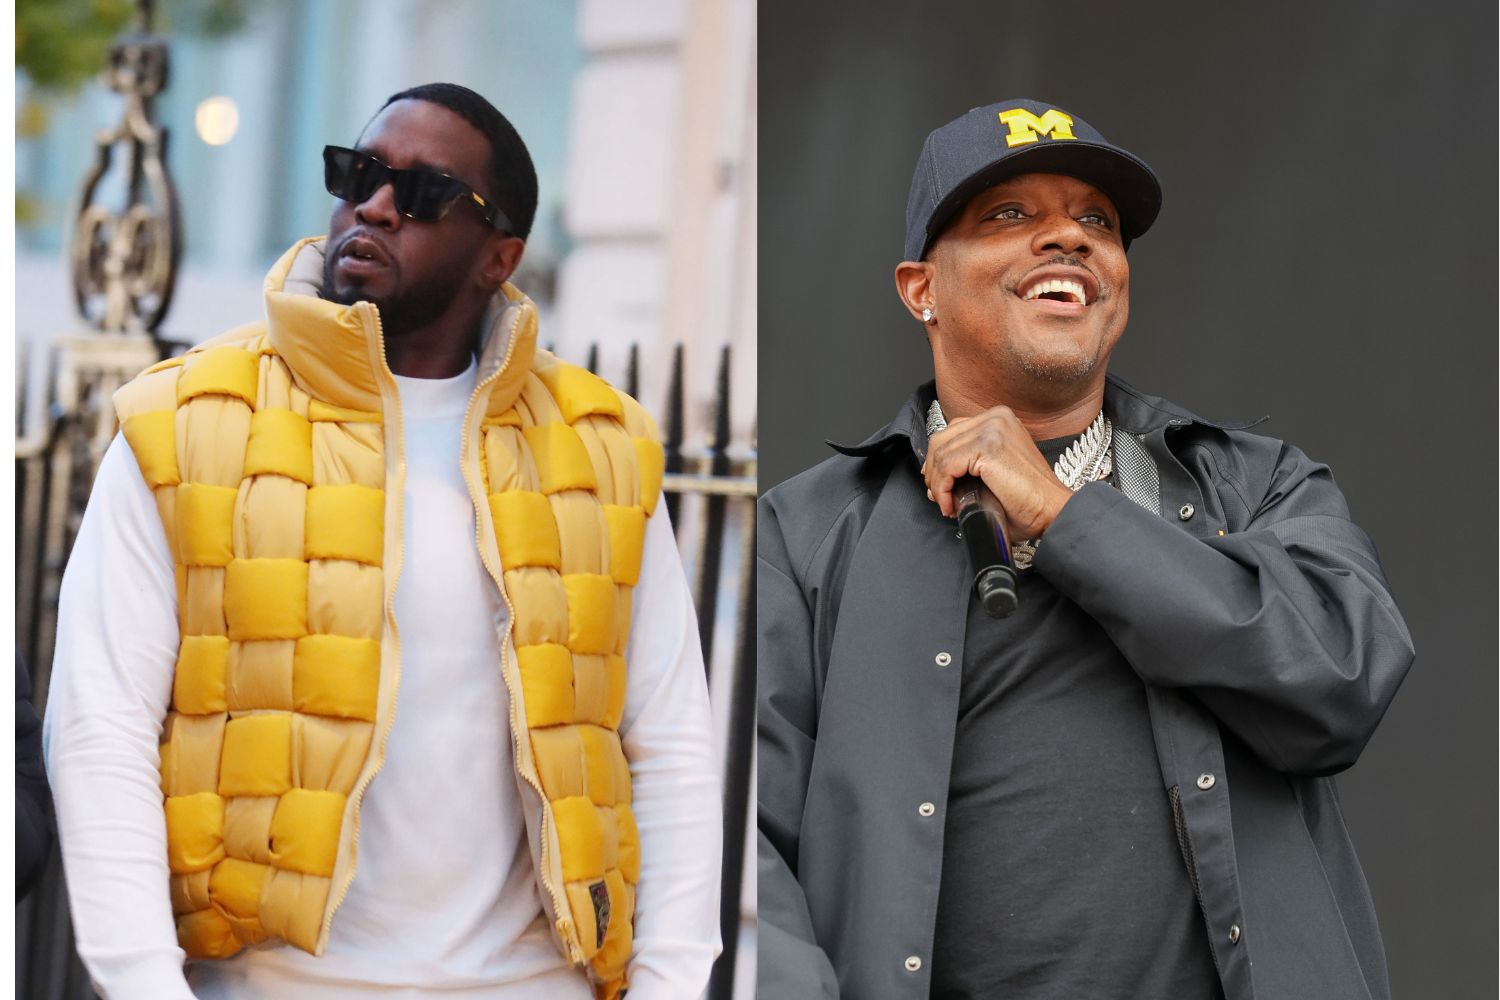 Mase Reacts To Federal Raid On Diddy’s Homes (Video) thumbnail